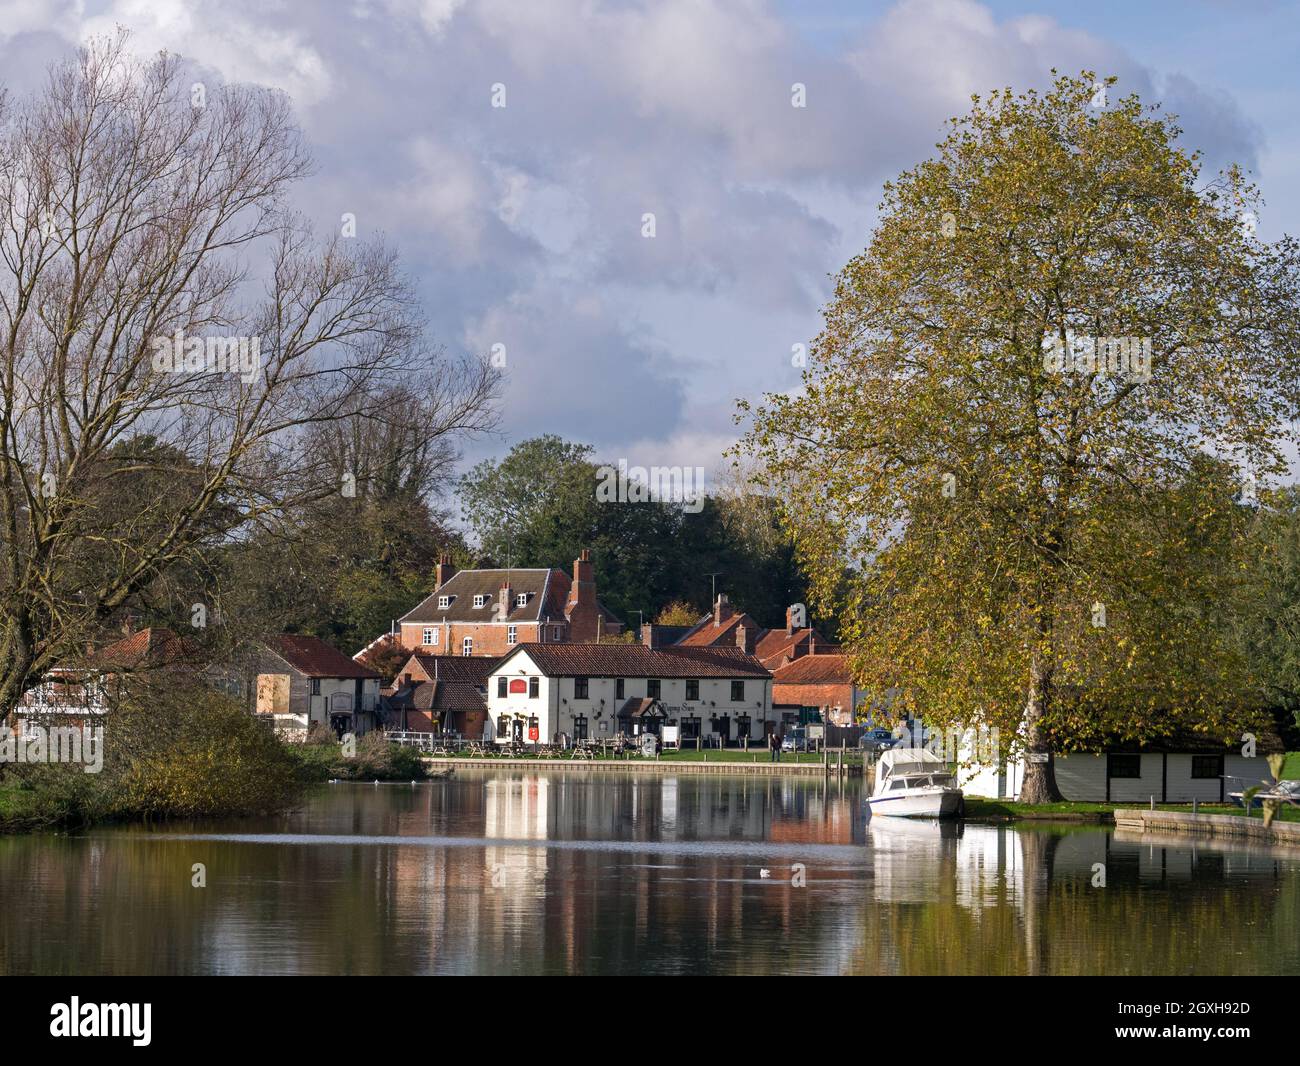 The Norfolk Broads Picturesque Village of Coltishall on The River Bure in Autumn, Coltishall, Norfolk, England, UK Stock Photo